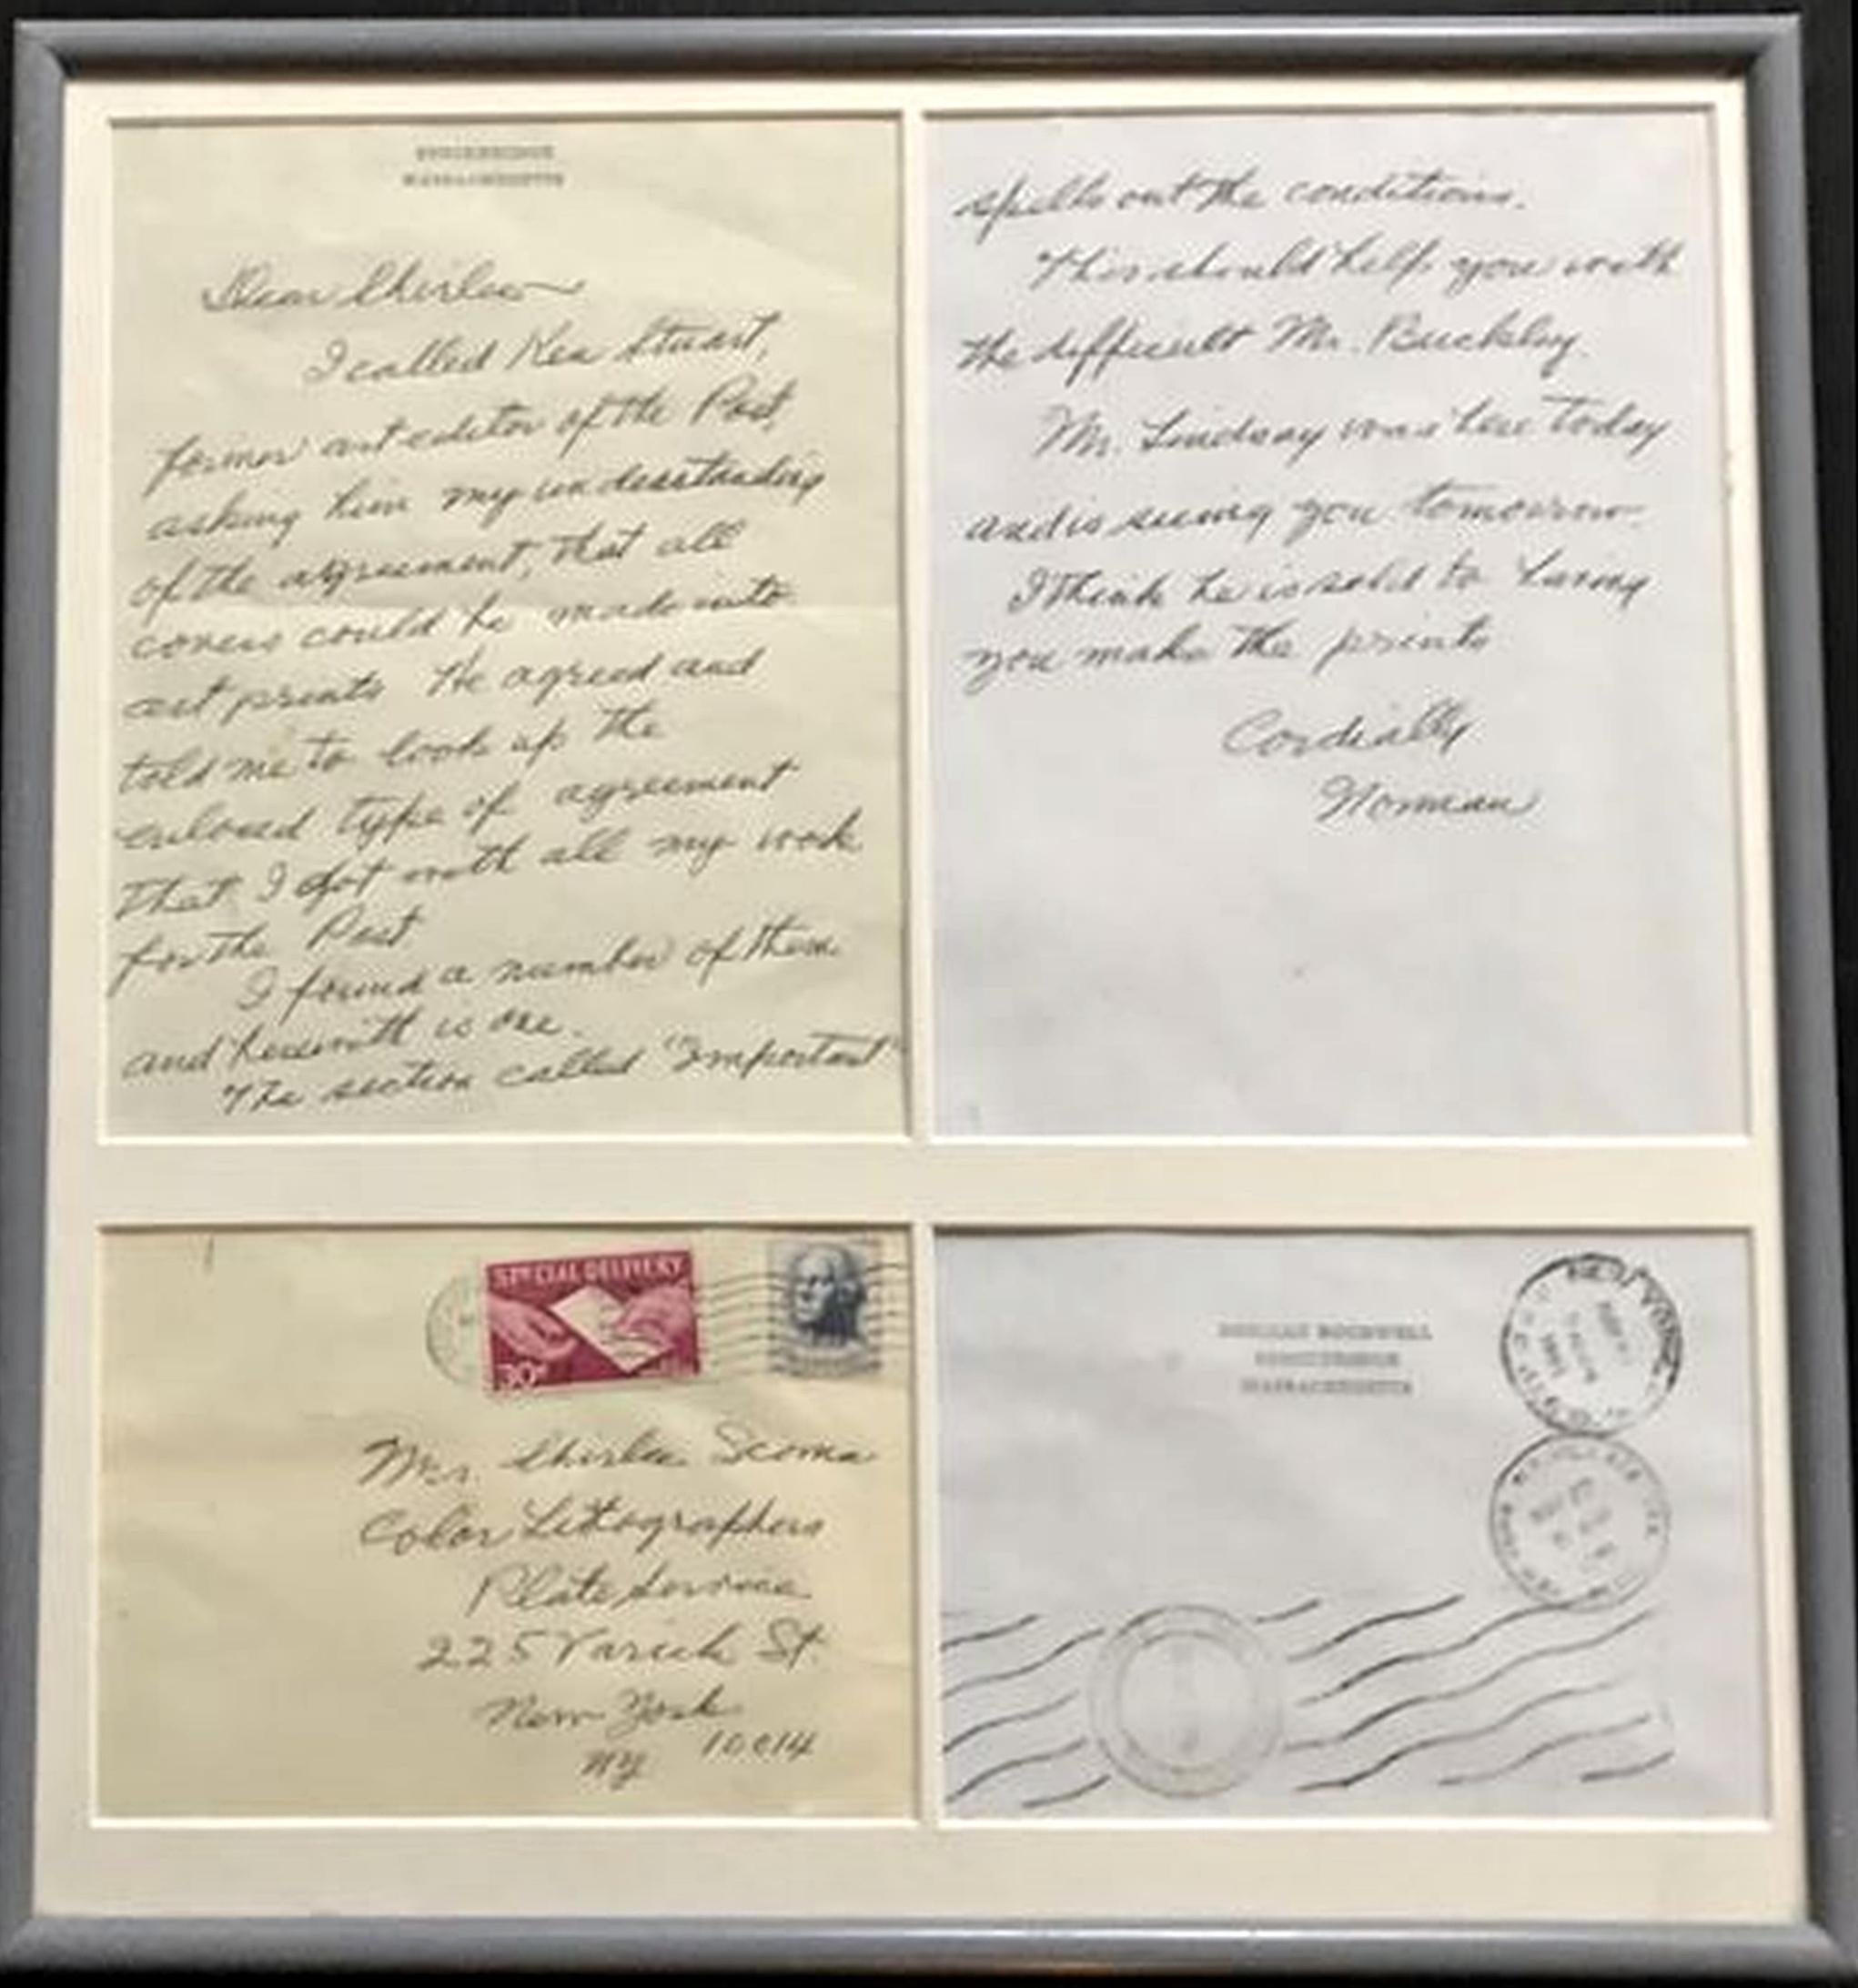 "This should help you with the difficult Mr. Buckley" handwritten, signed letter